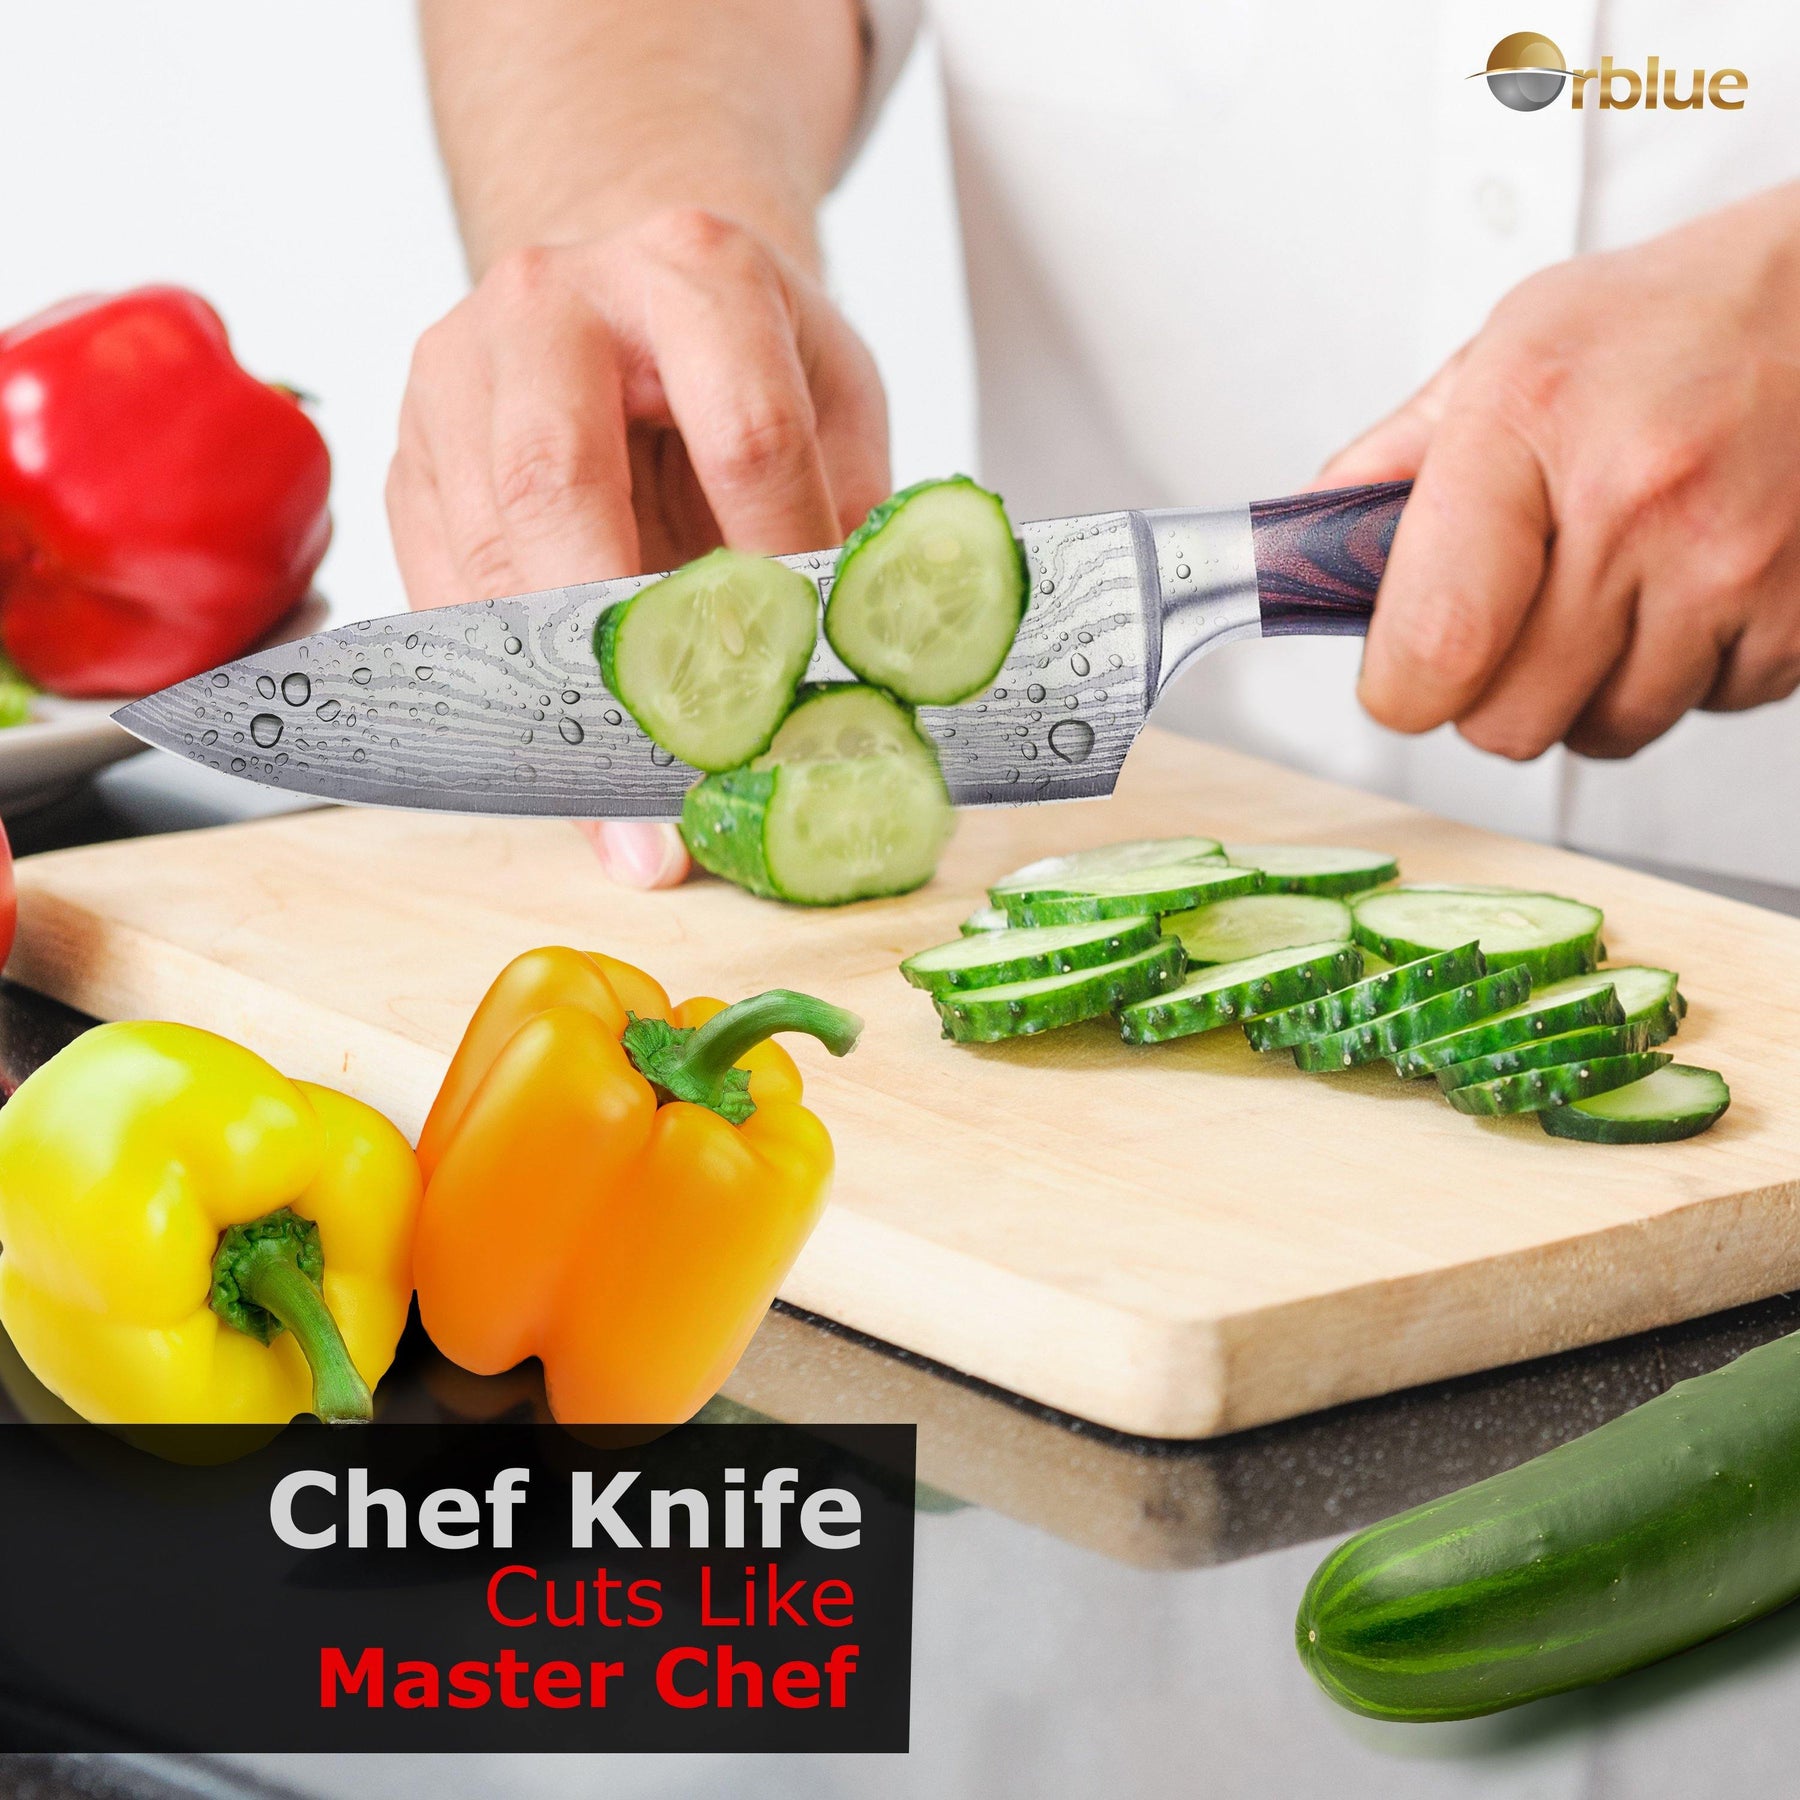 Xile chef's special kitchen round head knife for chopping vegetables